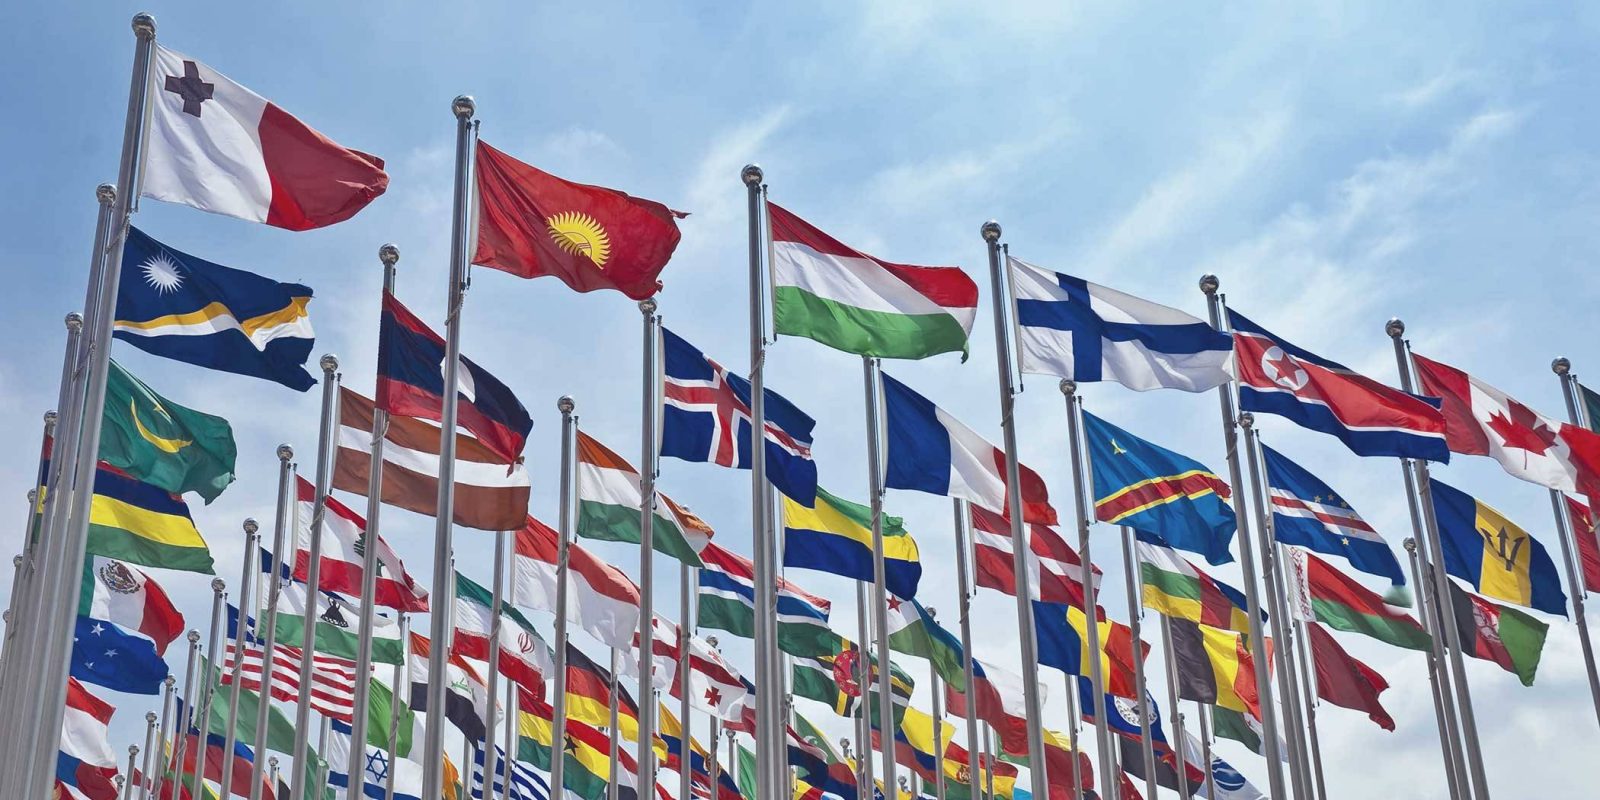 The flag of each country blowing in the wind.